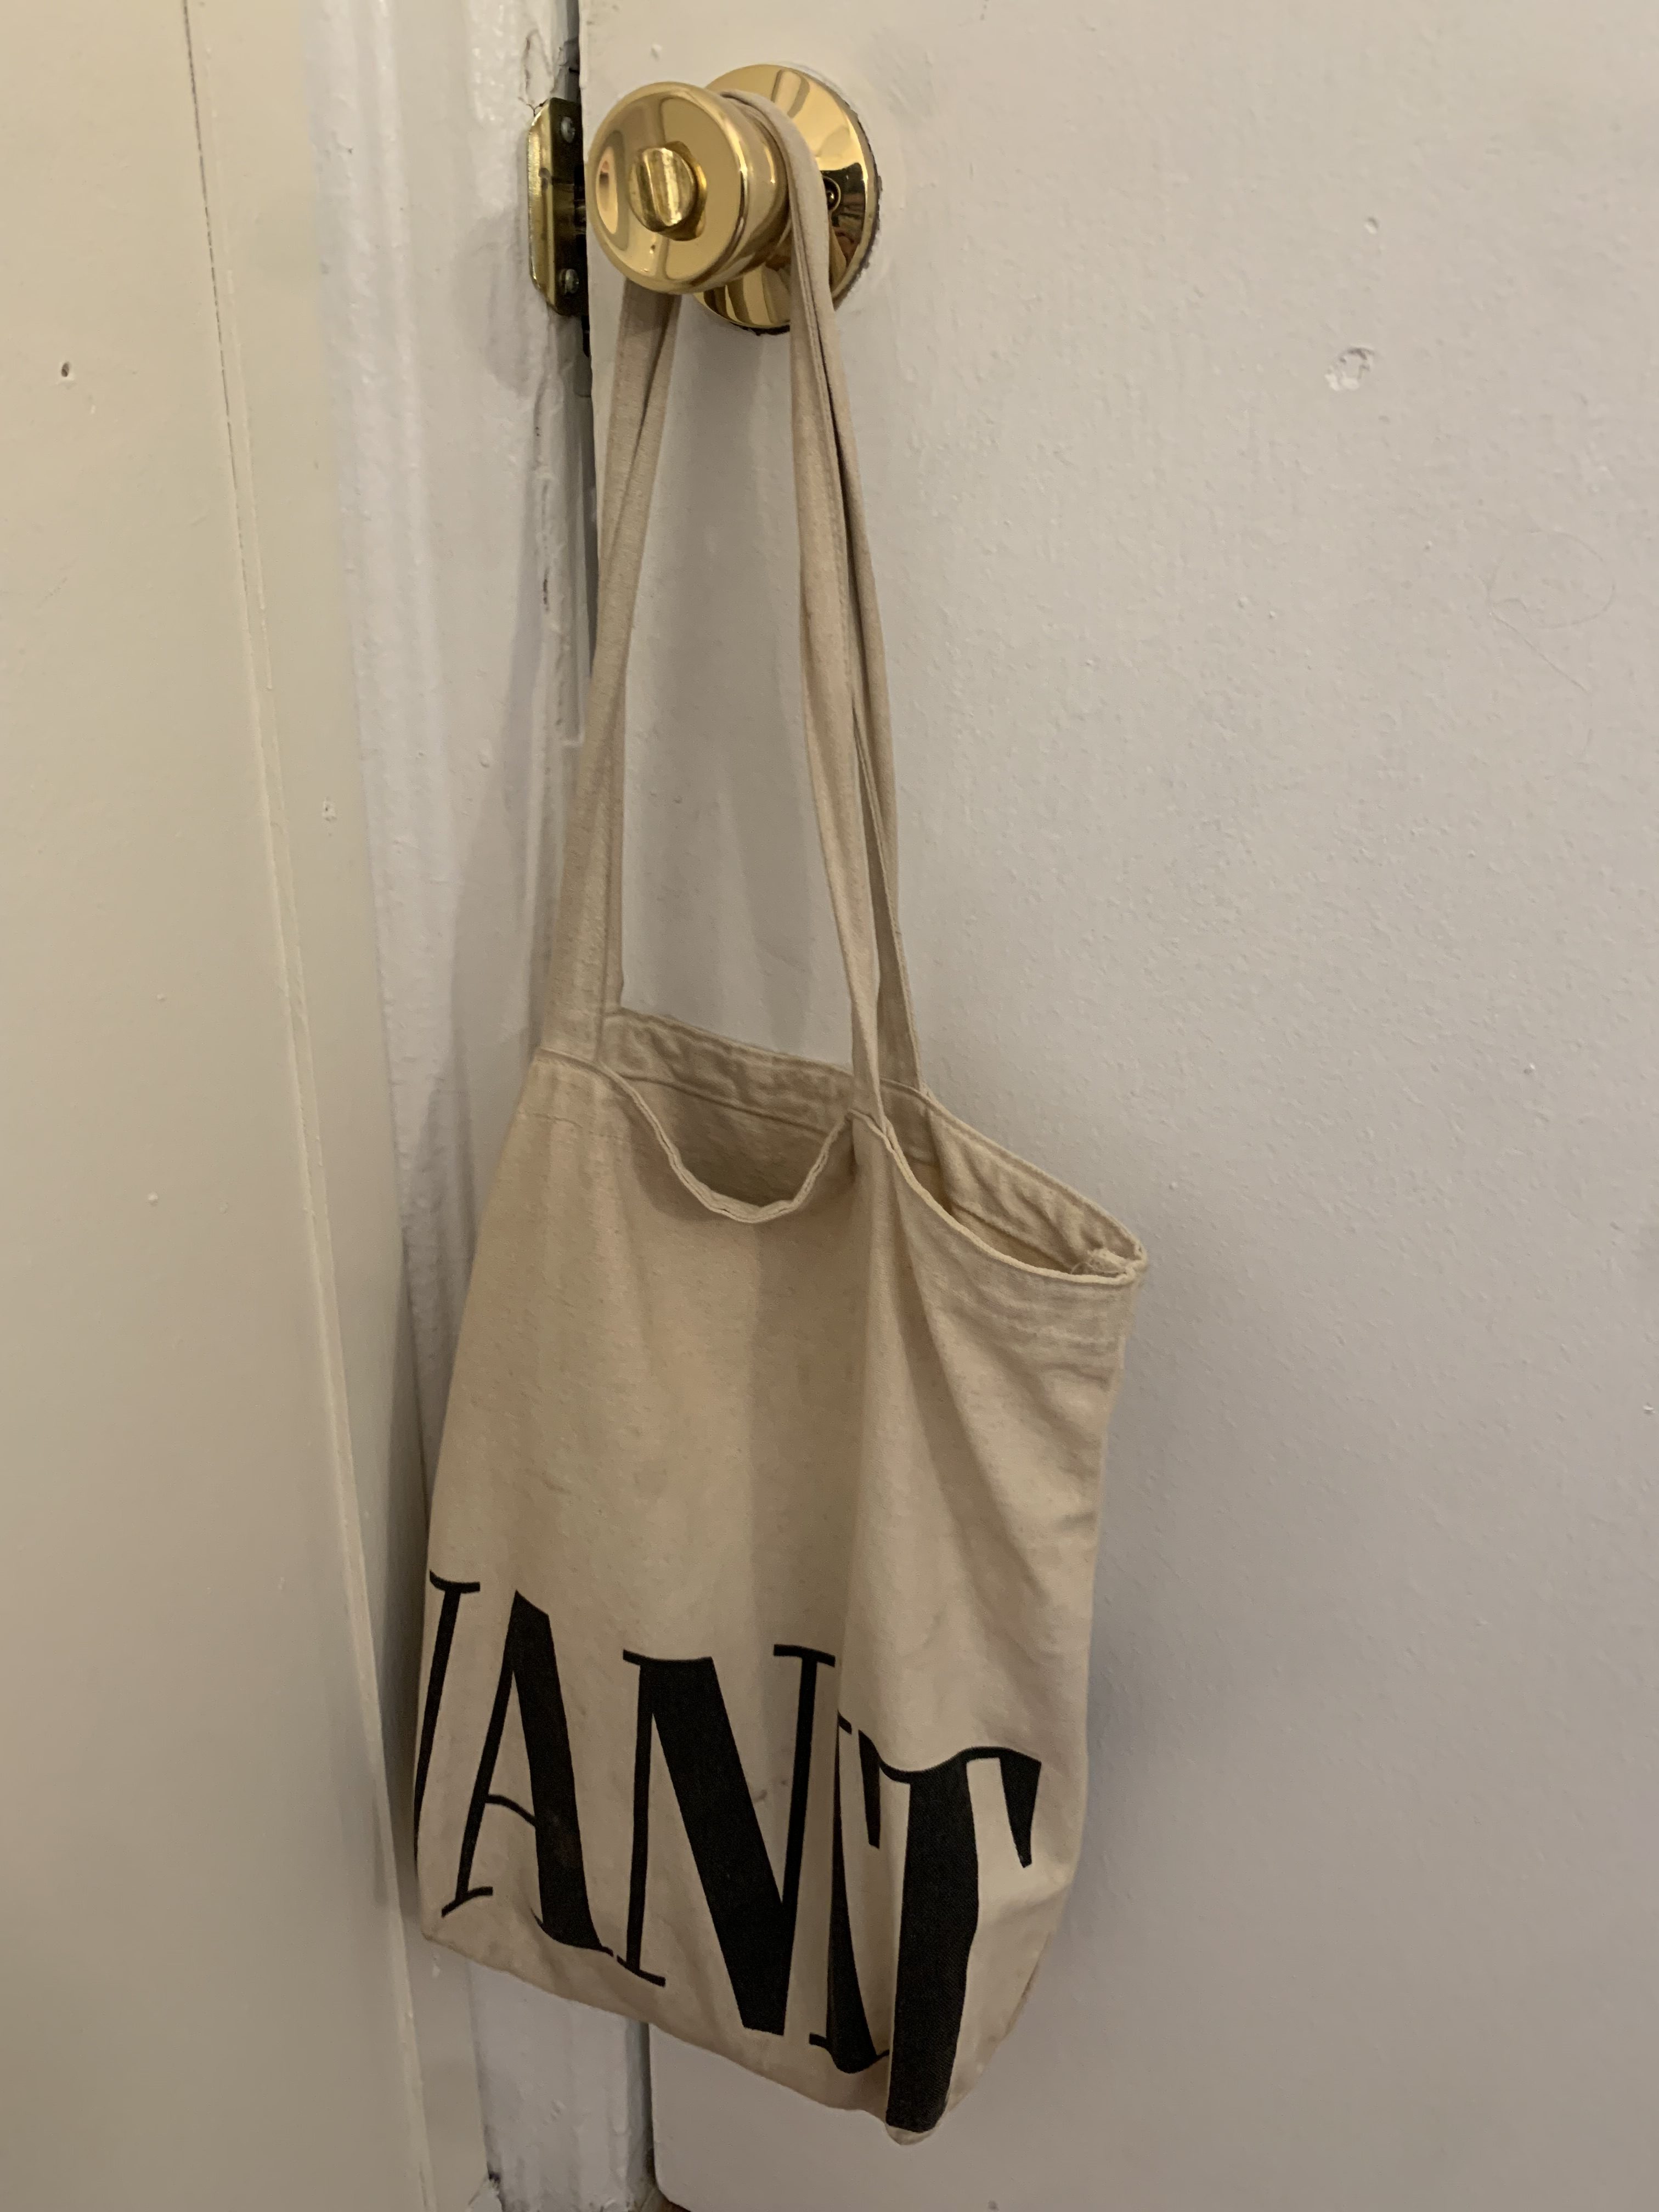 Everyone Needs an Emotional Support Tote Bag